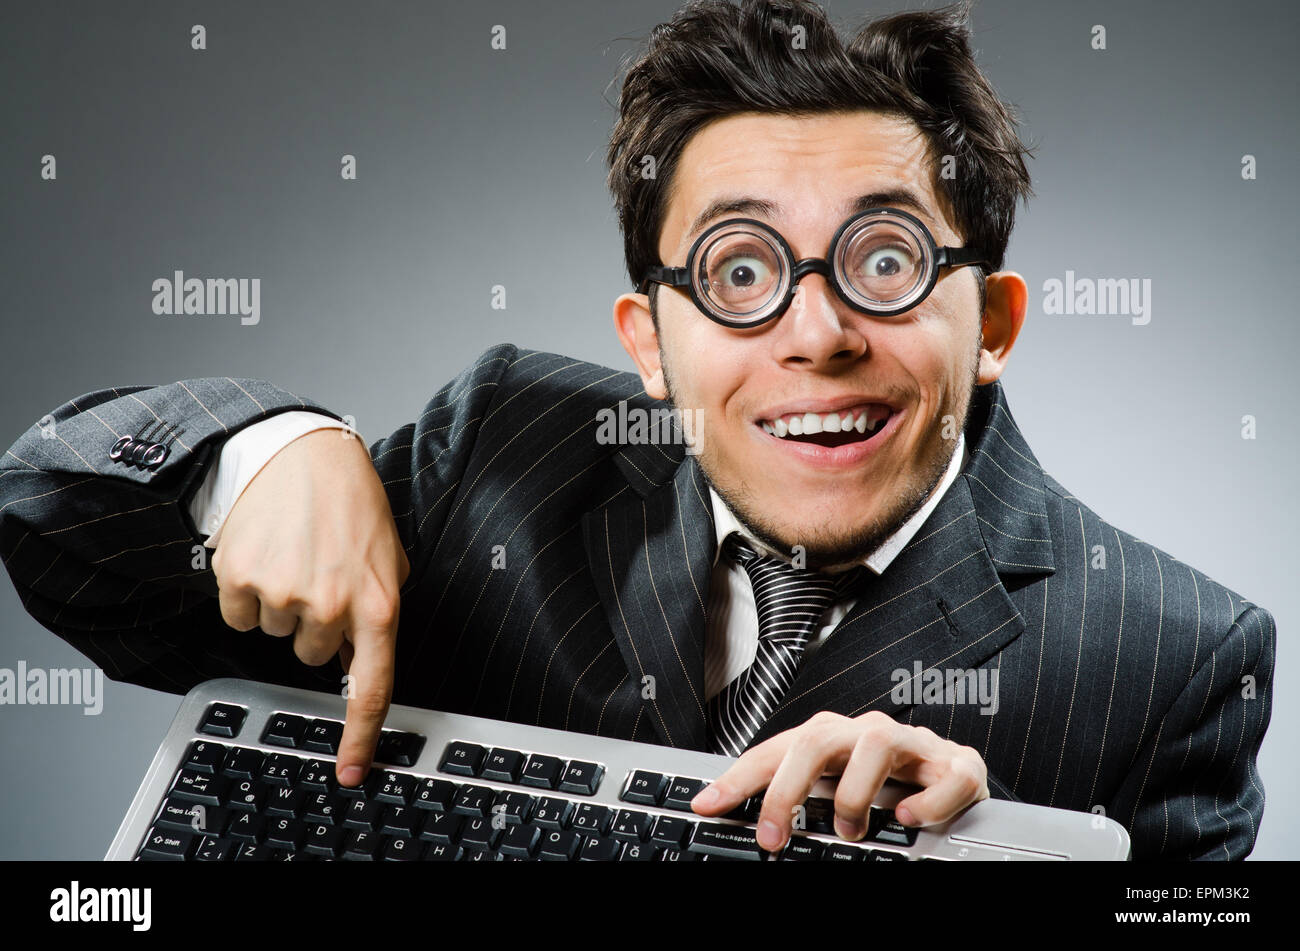 Computer geek with computer keyboard Stock Photo